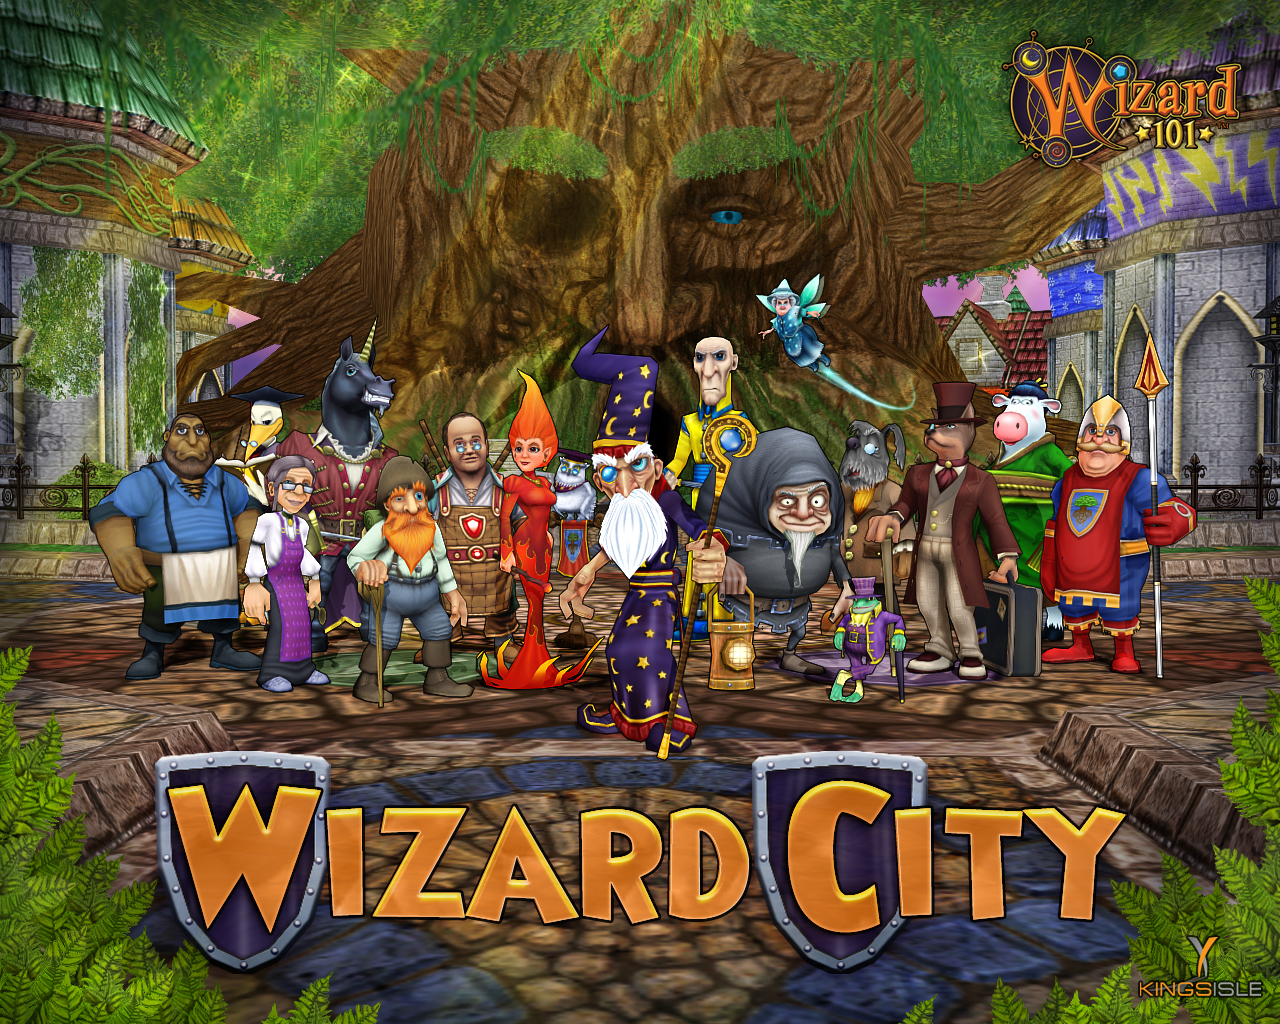 Heyku.me Wizard 101 Game Review Based on My Experience While Playing This